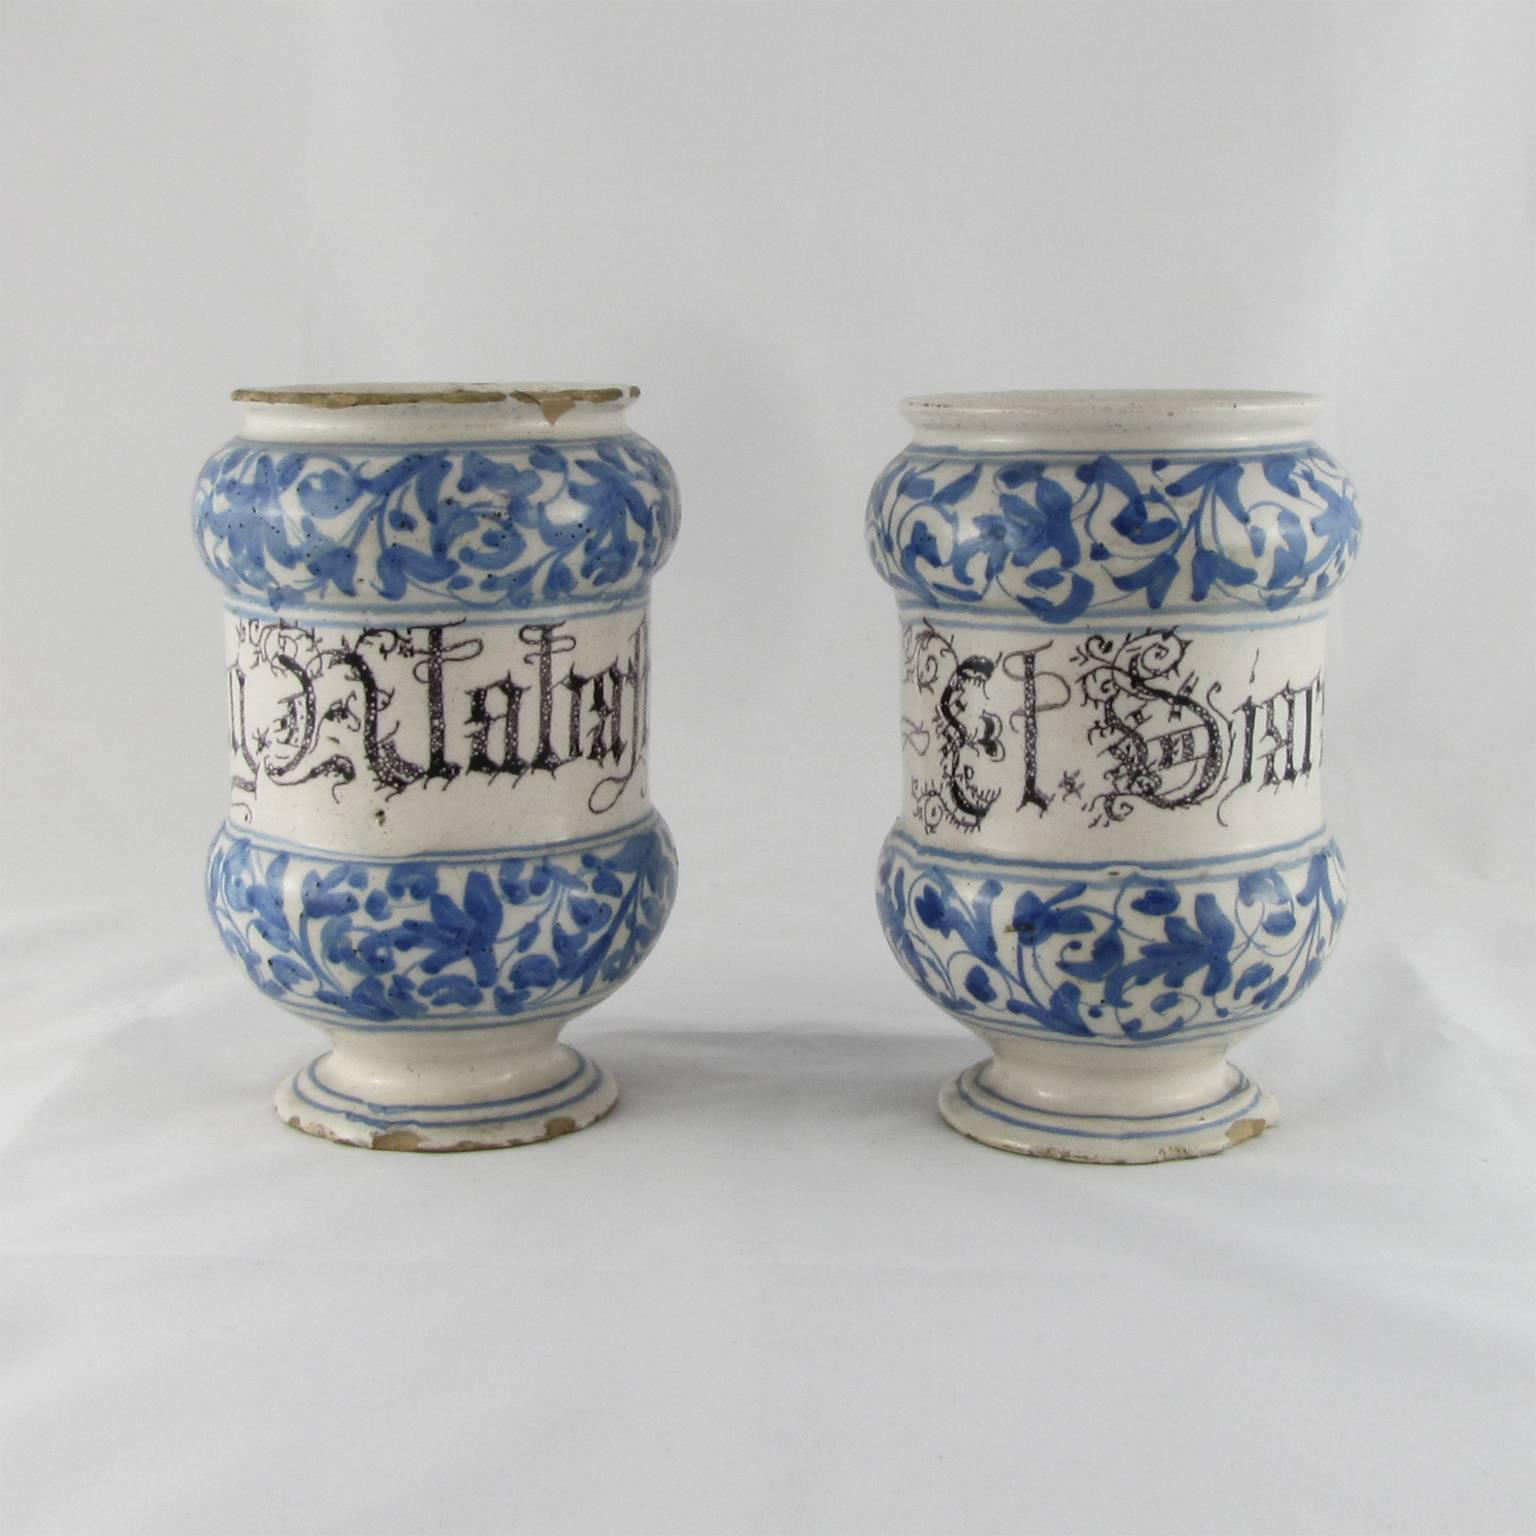 A beautiful pair of Albarelli, a type of Maiolica earthenware jars, originally medicinal jars designed to hold apothecaries’ ointments and dry drugs.
The jars are labelled ‘El Diacatolicon’ and ‘Alabastro’ in black letters and they feature a blue